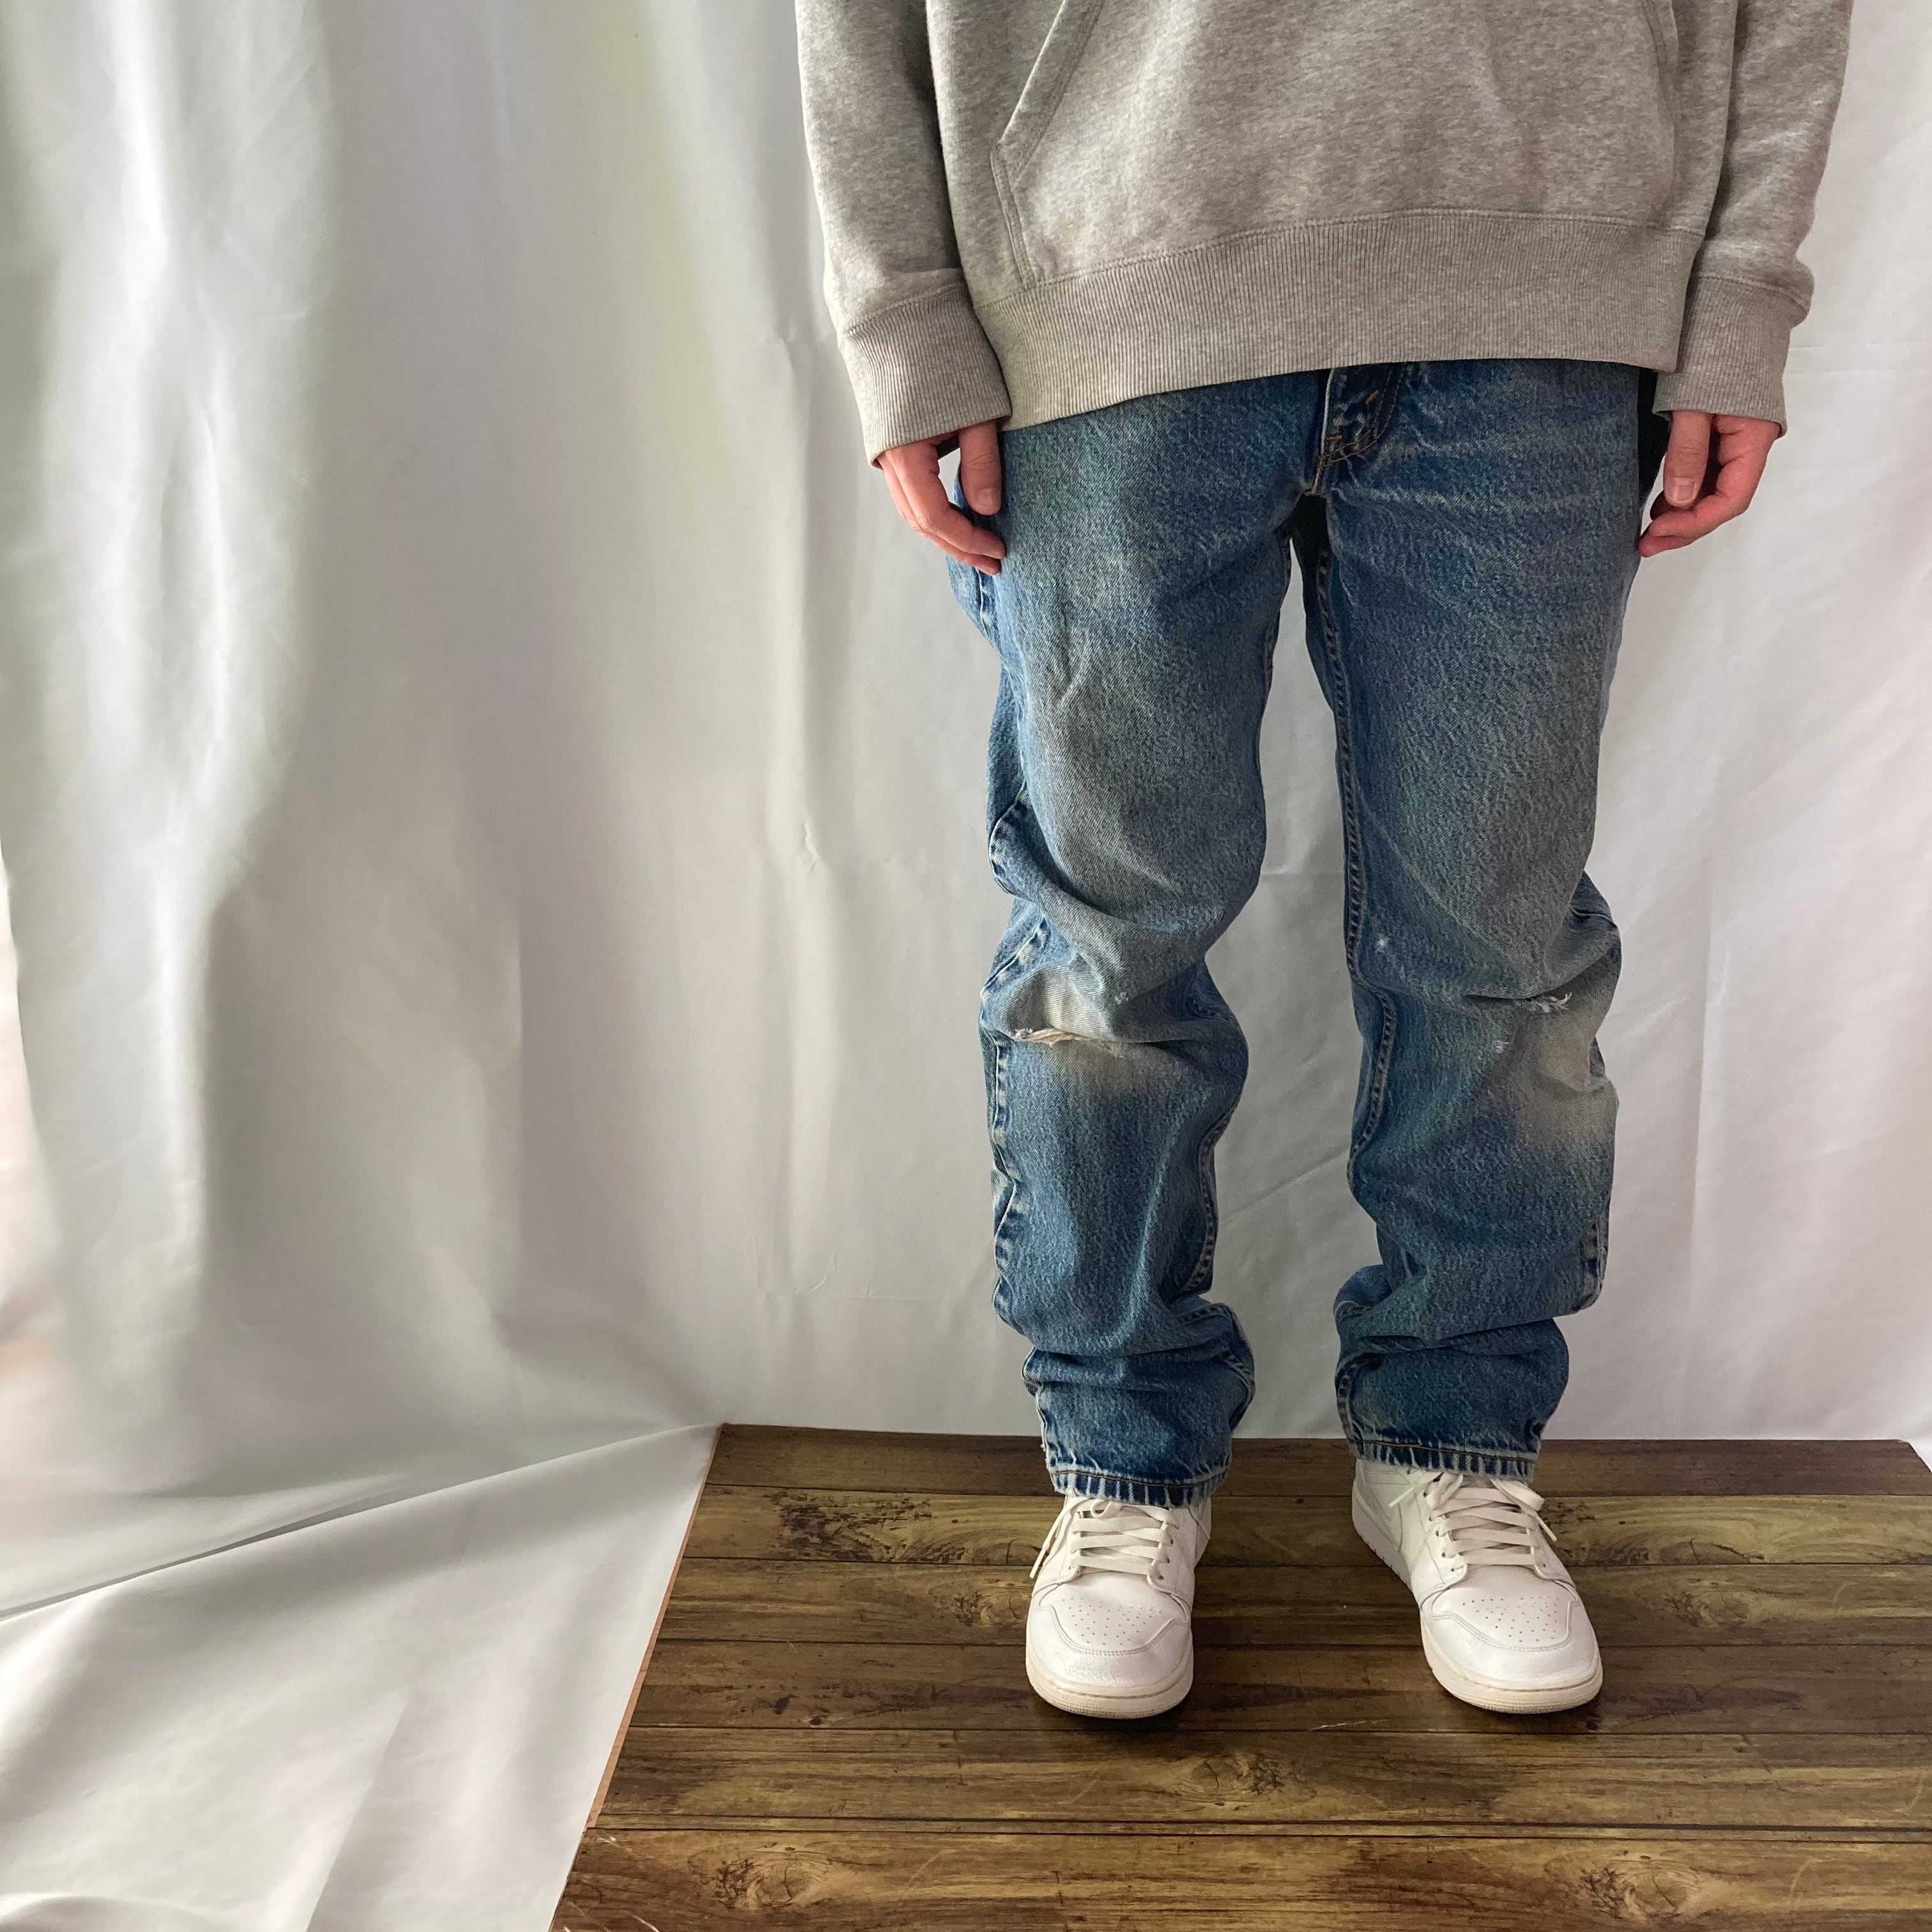 【Levi's 505】W34×L34 Made in USA Denim Jeans リーバイス 505 ...